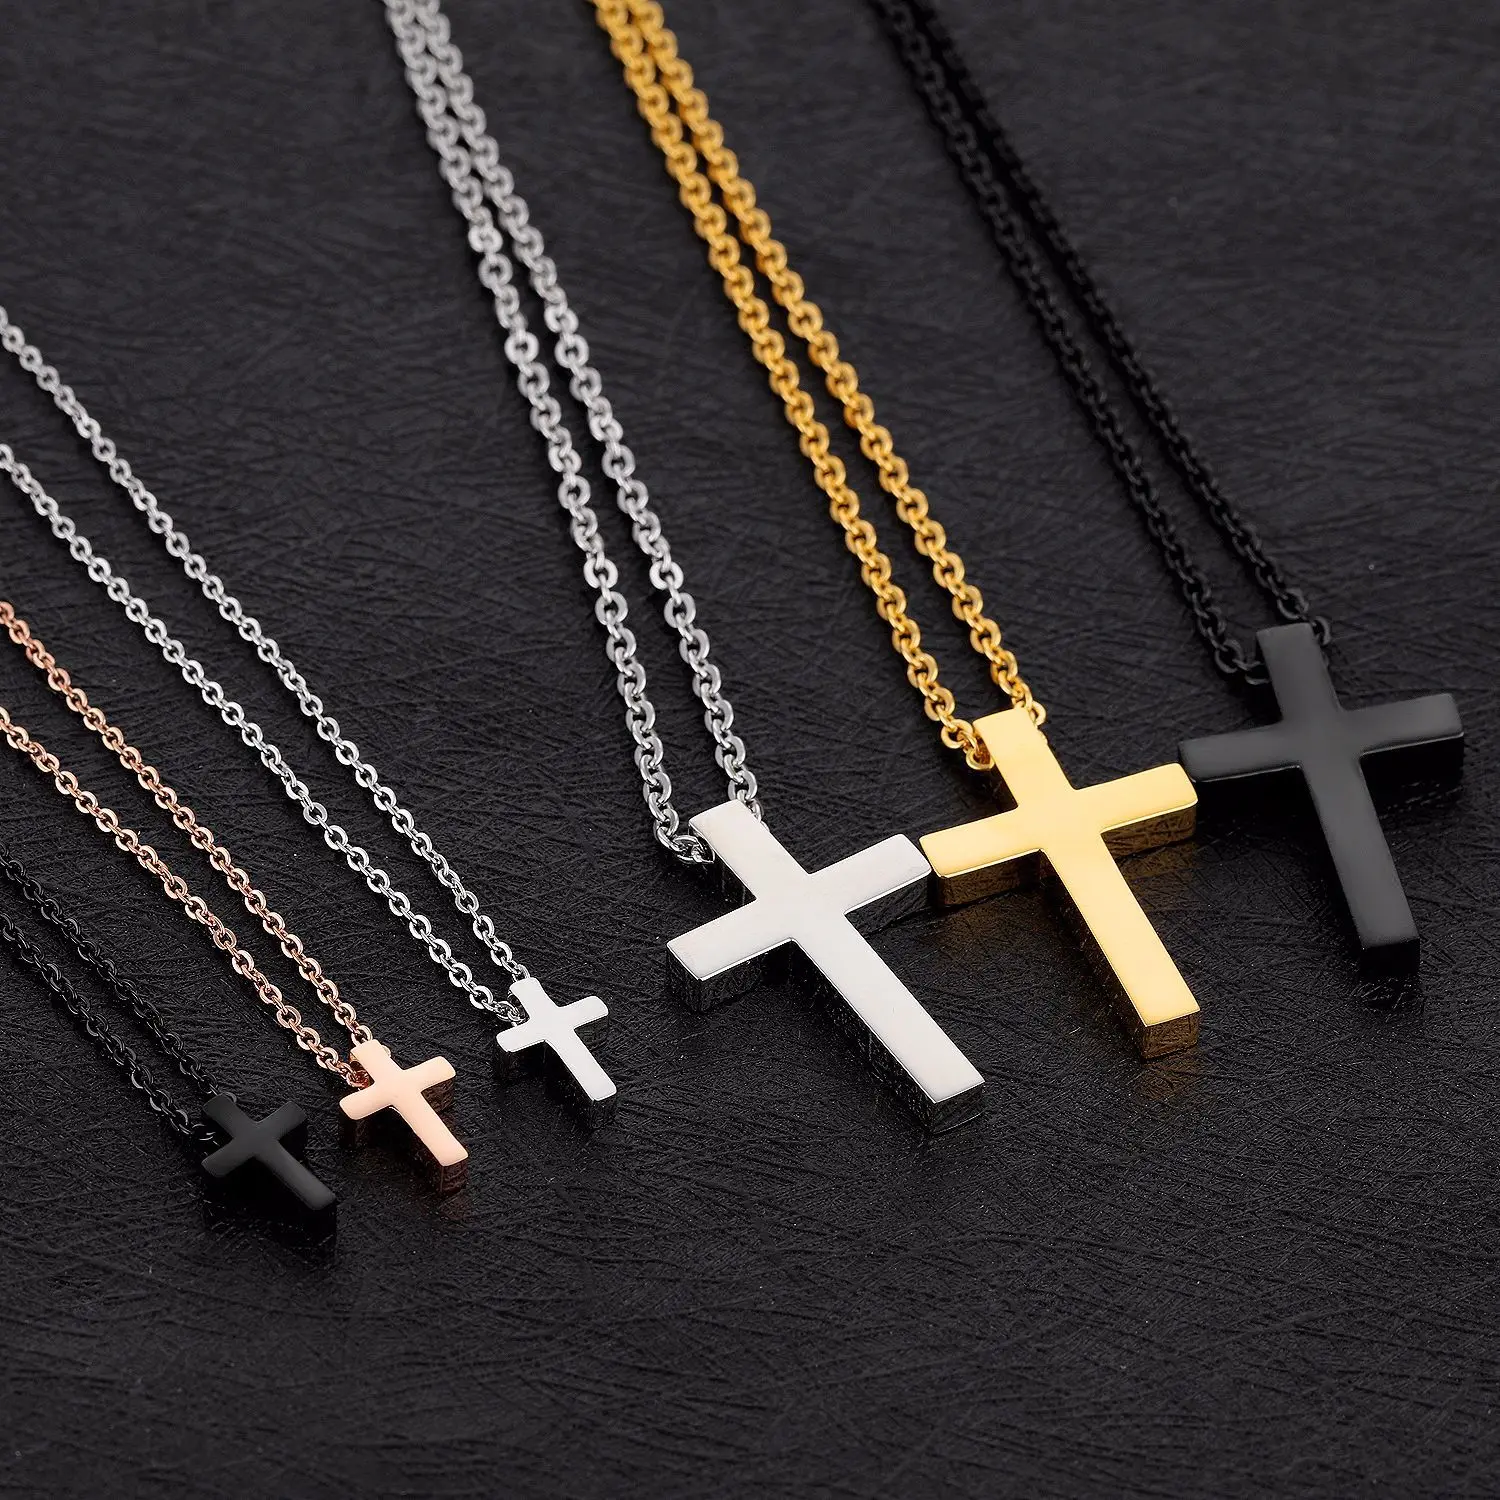 

Hiphop Cool Jewelry Cross Pendant Necklace Unisex Pair Couple Necklace Stainless Steel Men Women Gift, Picture shows